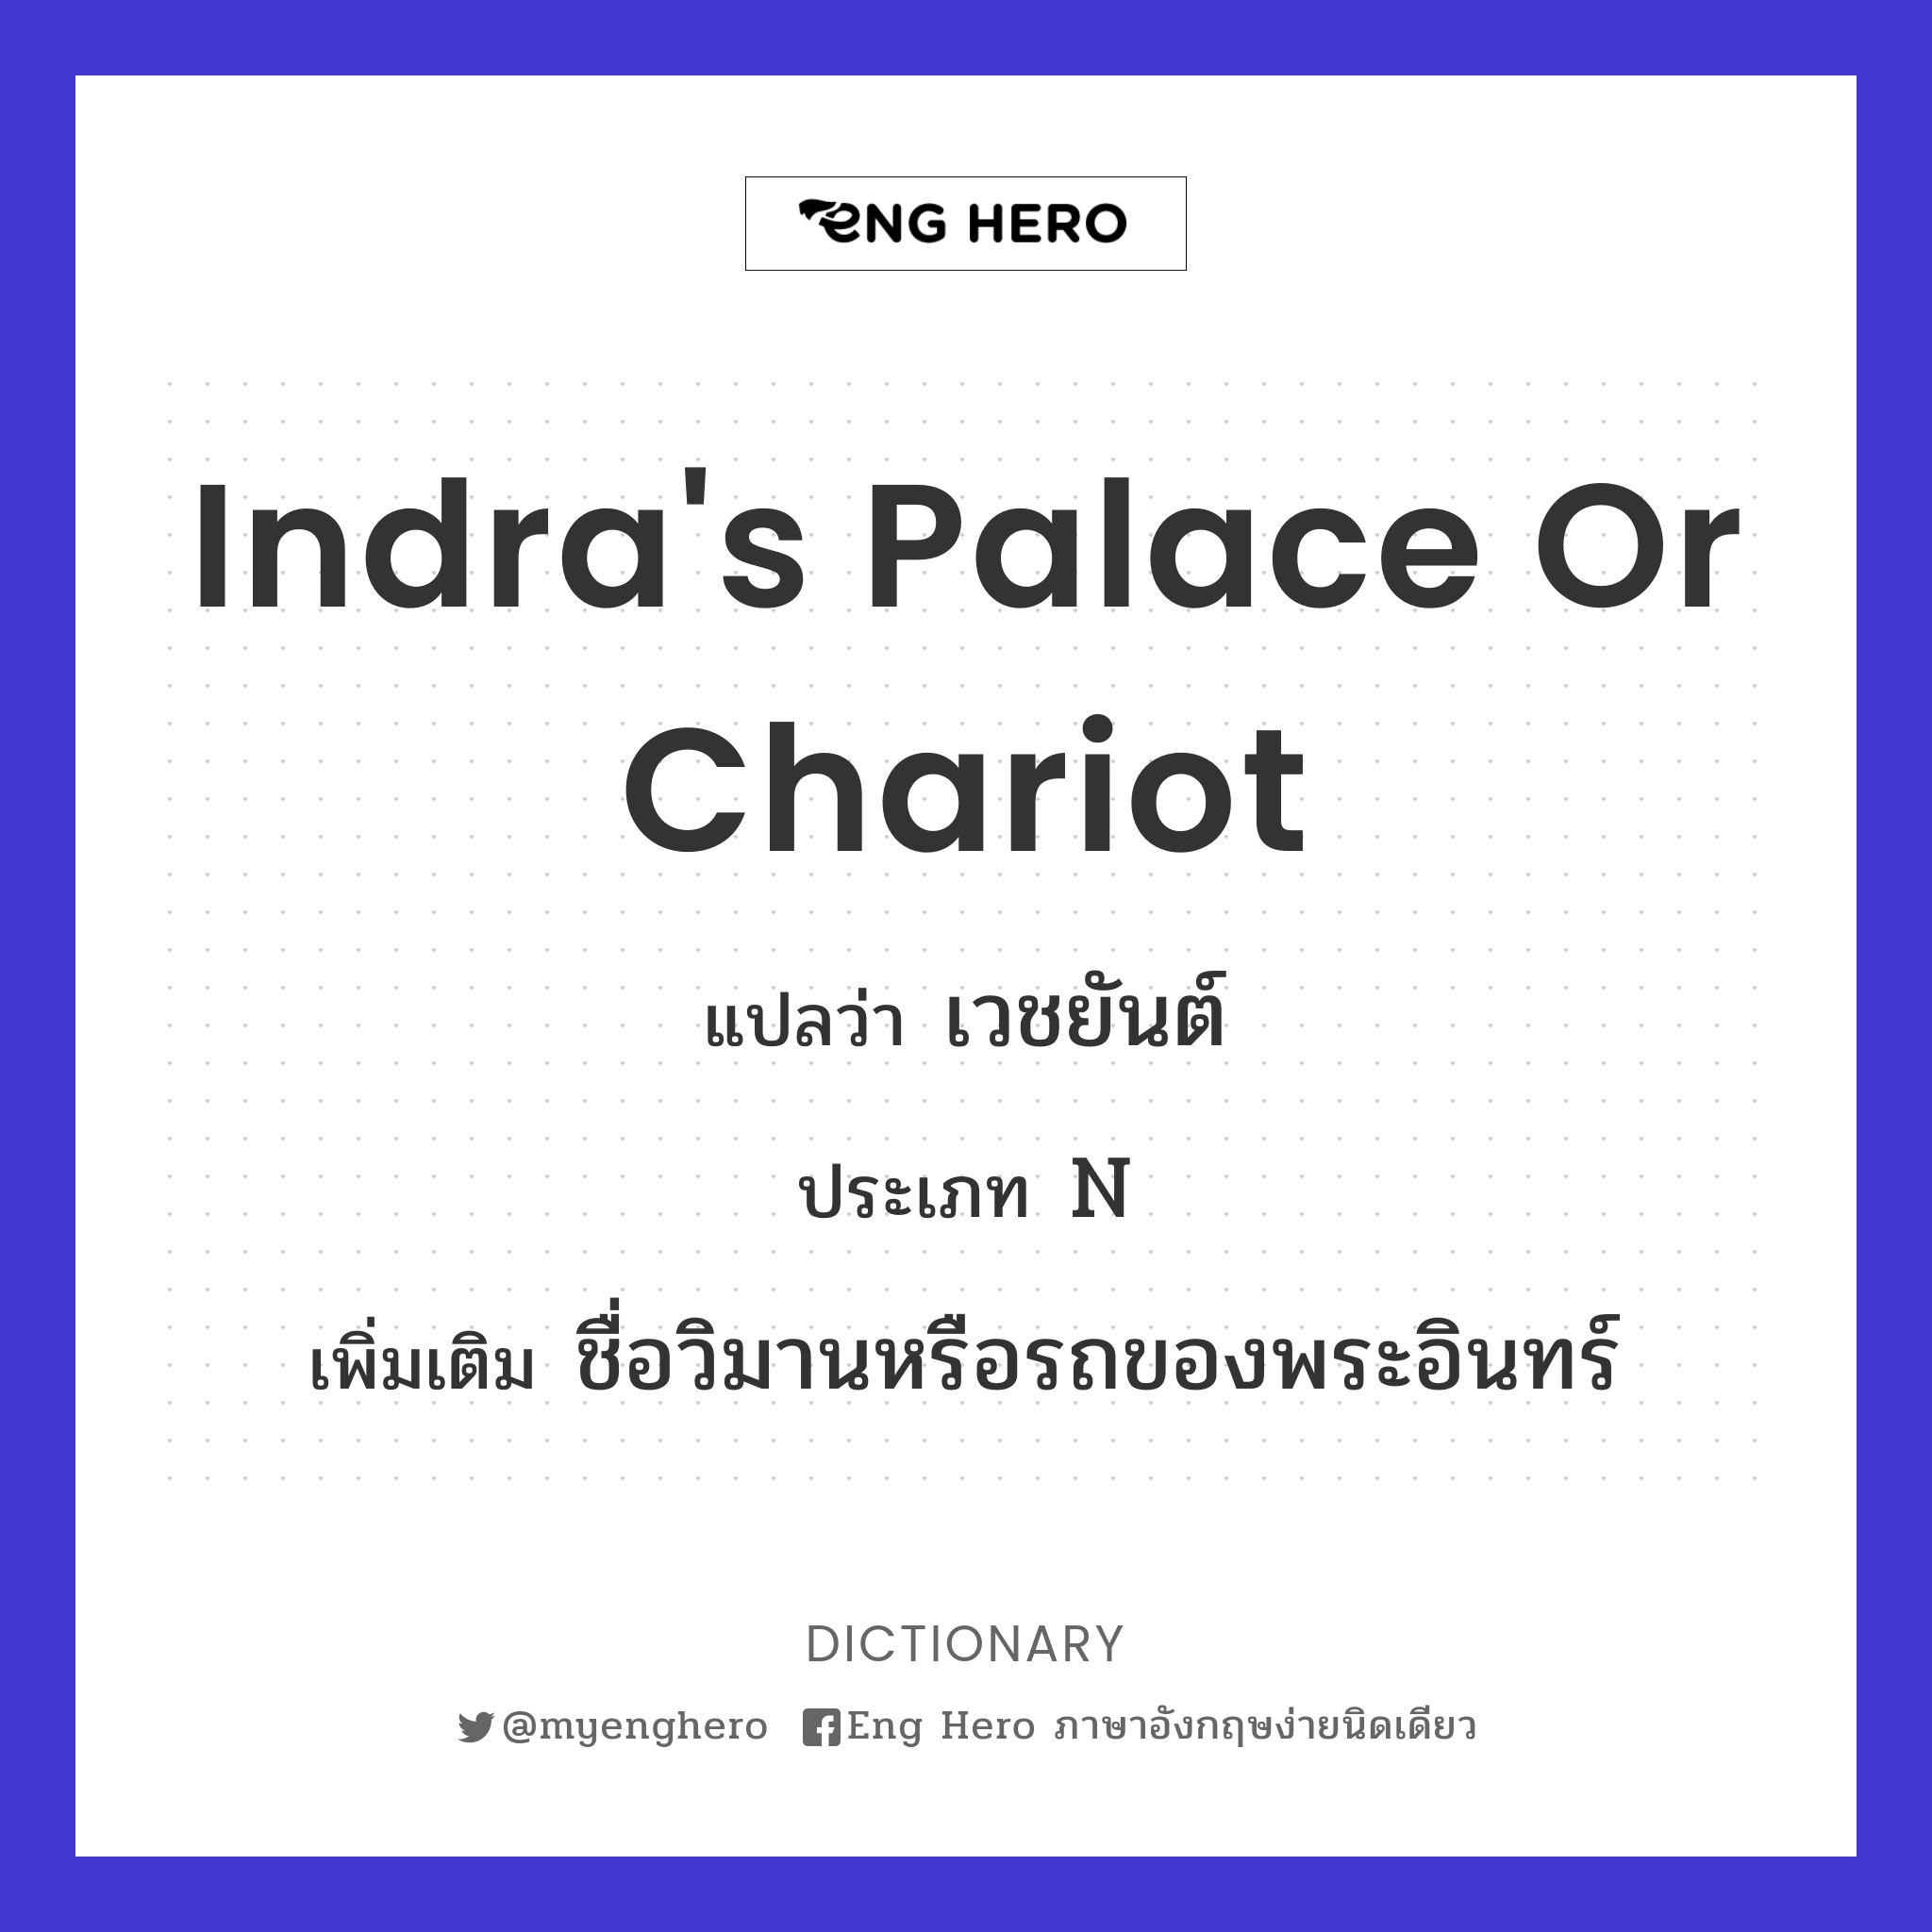 Indra's palace or chariot